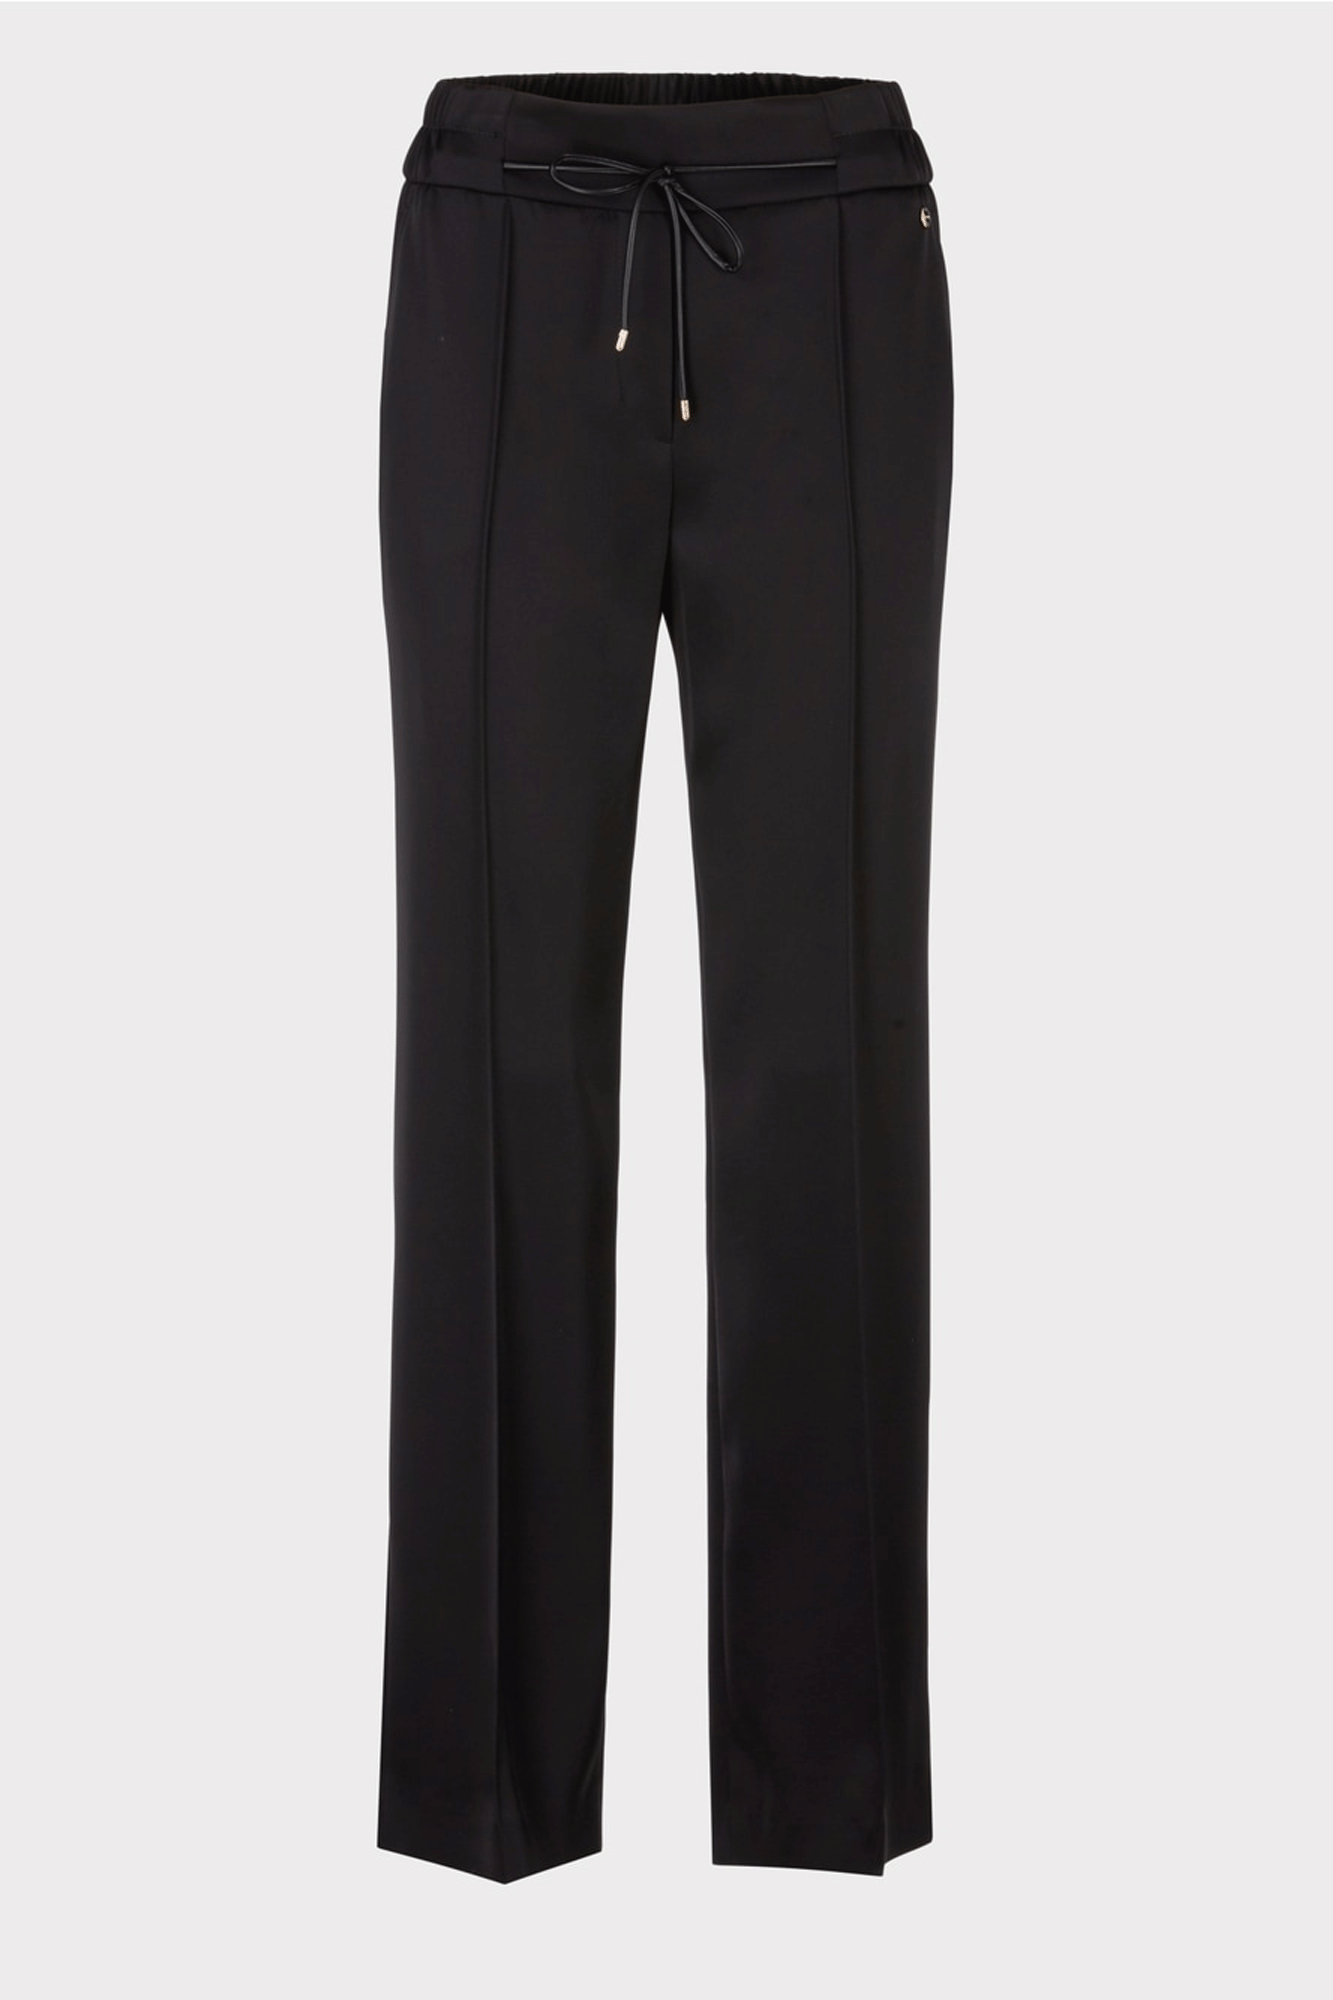 Introducing the Sparkling Mushrooms Pants from Marc Cain. Made of high-quality, lightweight fabric, these comfortable pants feature an adjustable leather strap and elastic waistband for adjustable fit. With stitched bow pleats and French pockets, they offer a great combination of style and function.